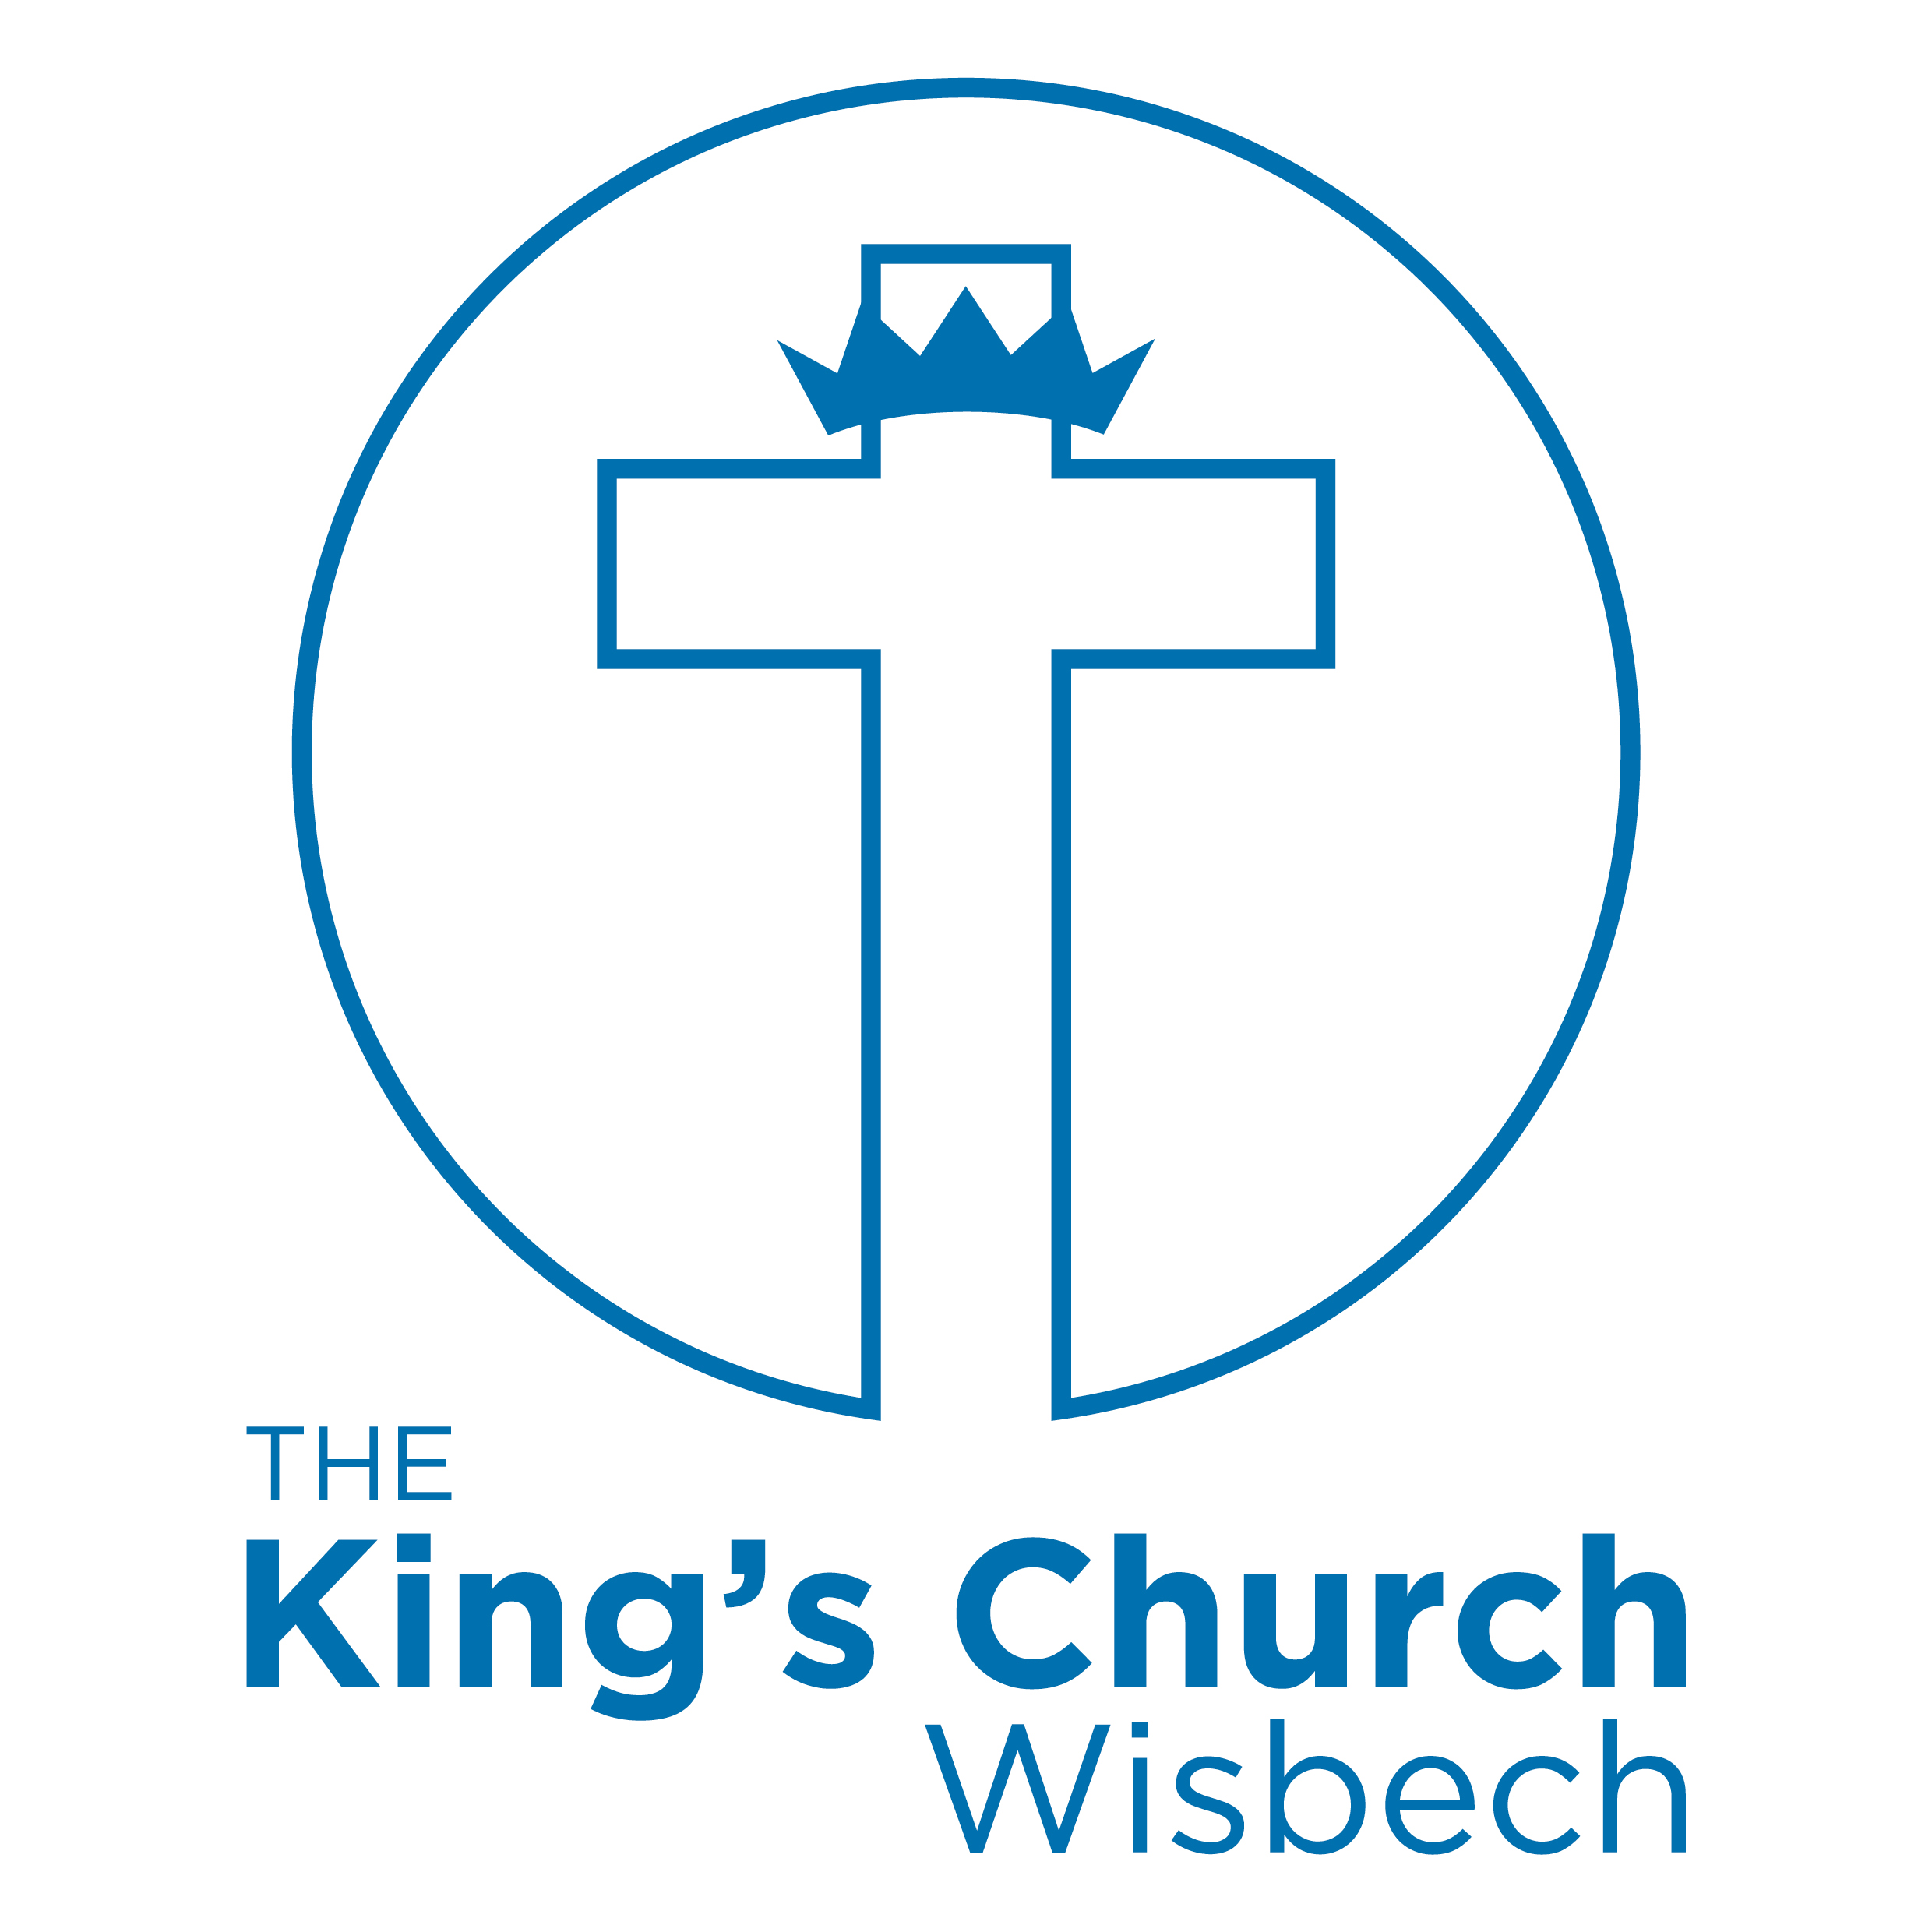 Kings Church - Our general information is that we've been meeting in the Queen Mary Centre for around 30 years. Our vision is: 'That we may present everyone mature in Christ' Colossians 1:28.